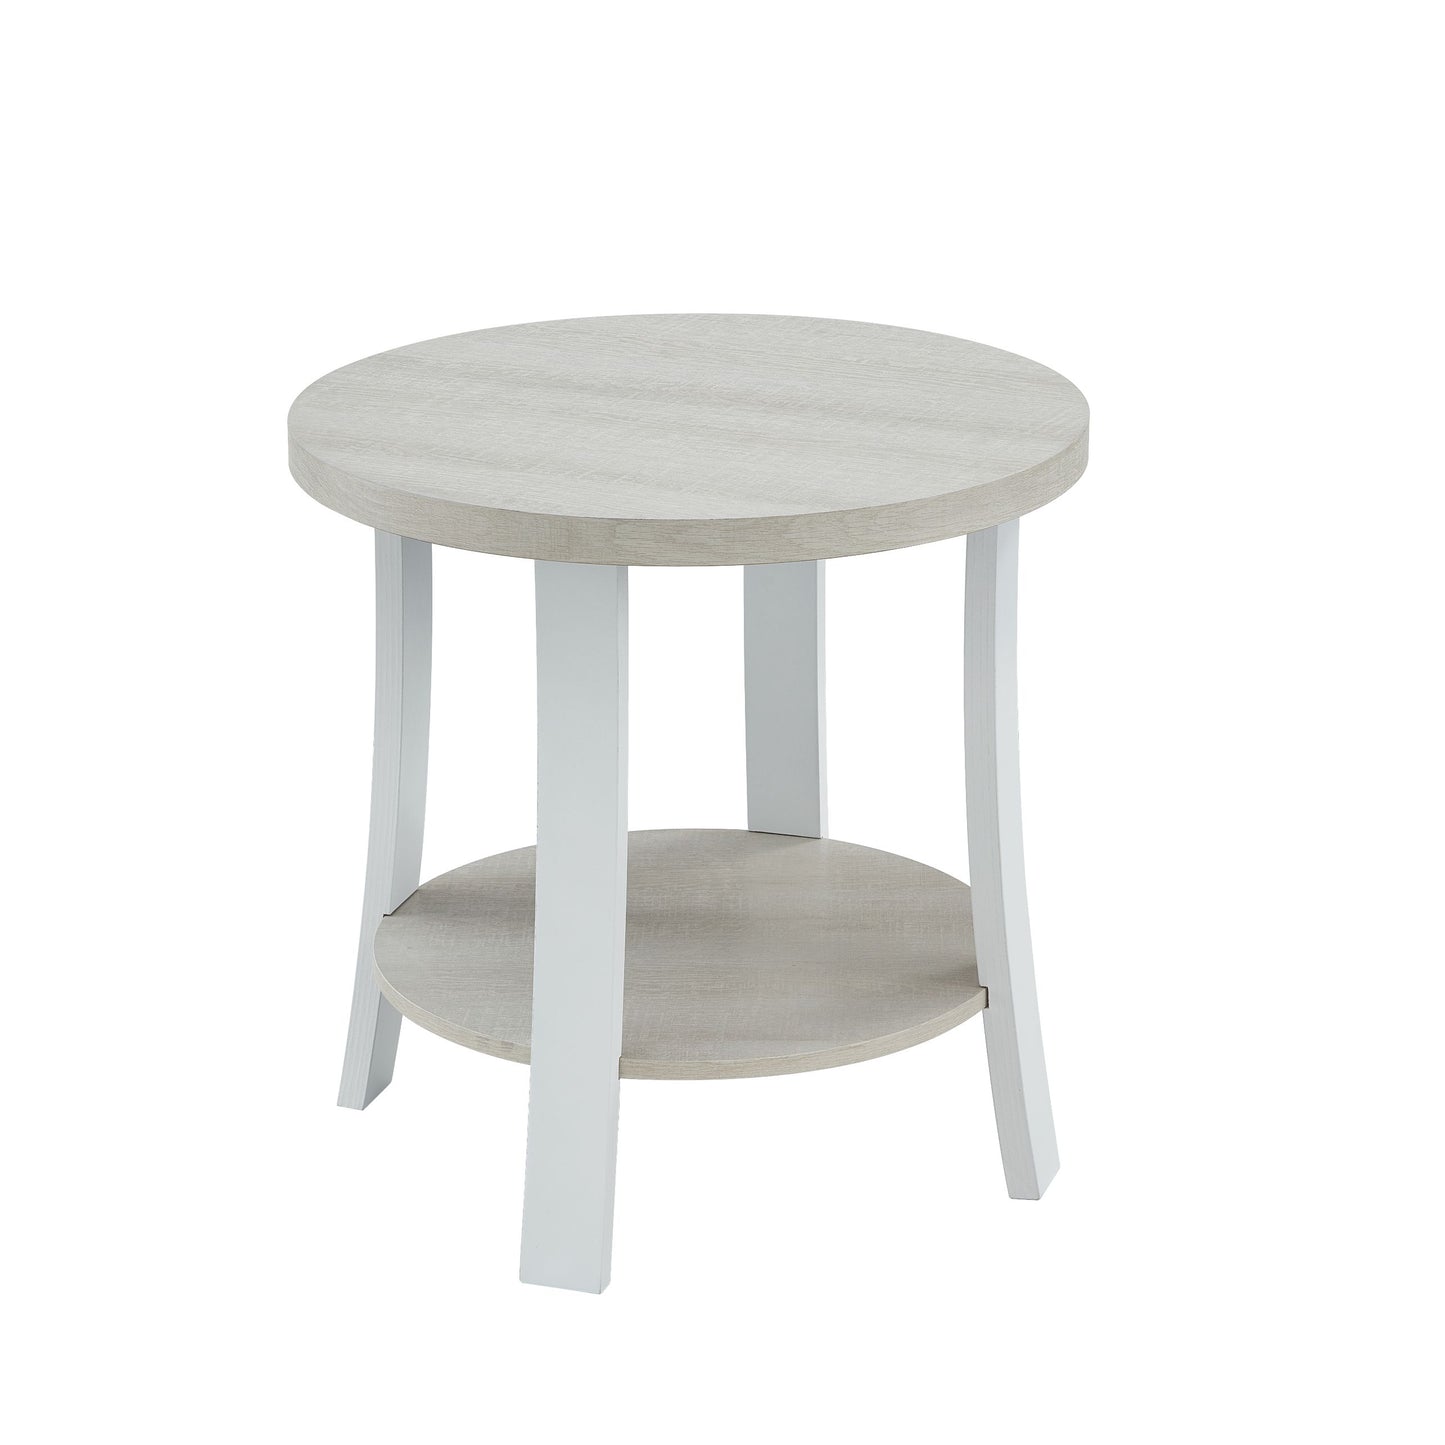 Anze Contemporary Round Wood Shelf End Table